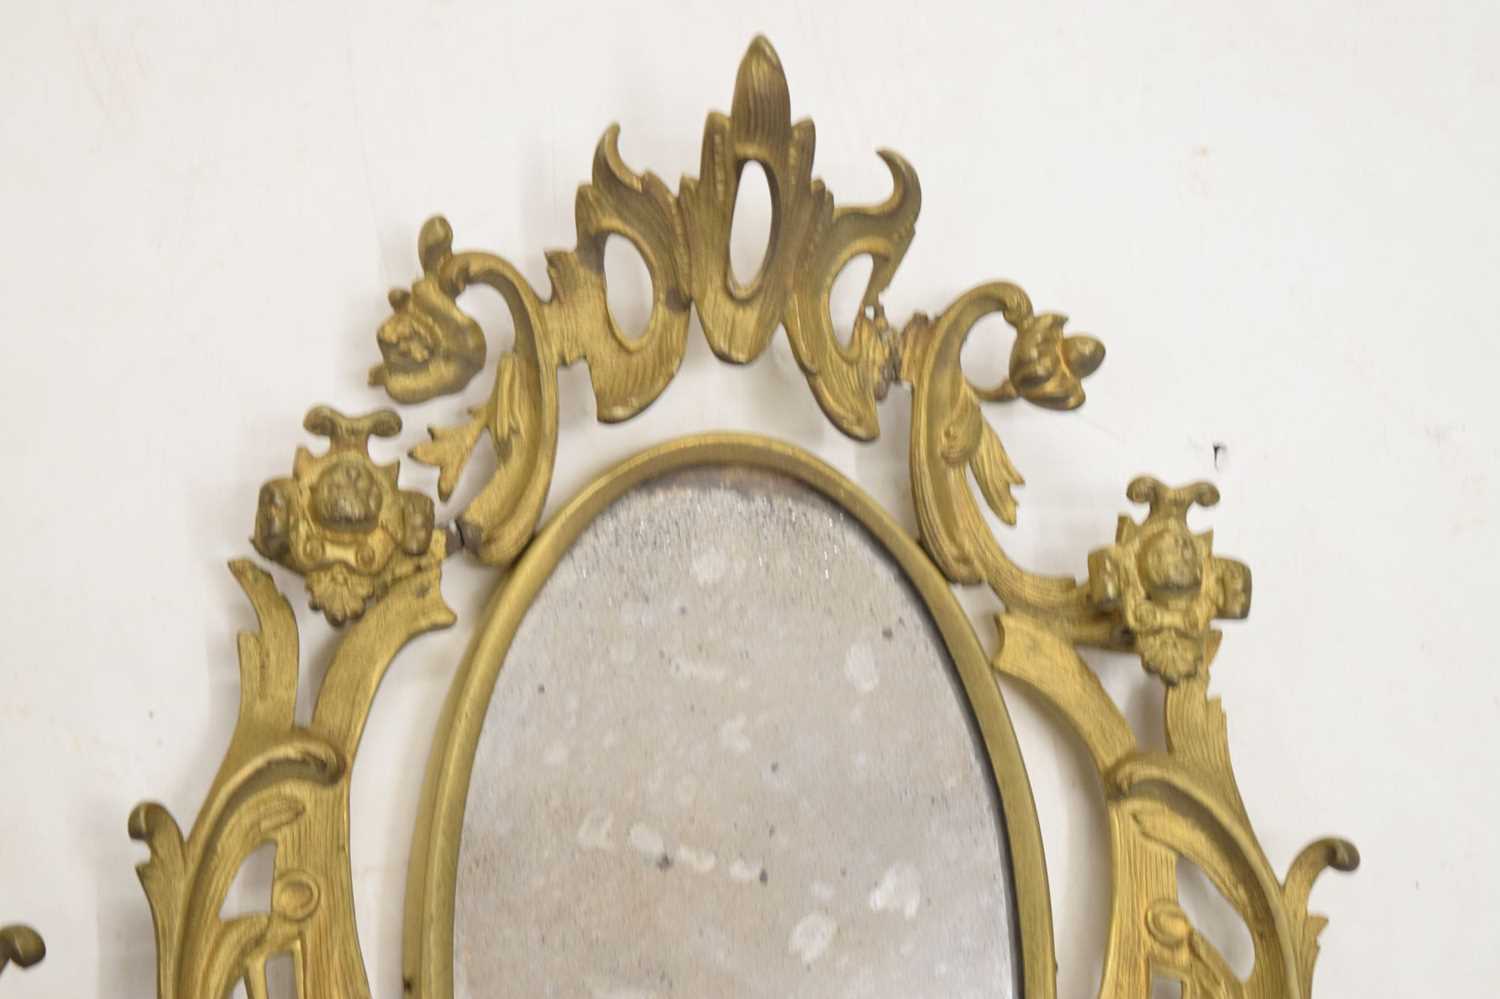 Pair of gilt metal wall mirrors - Image 6 of 8